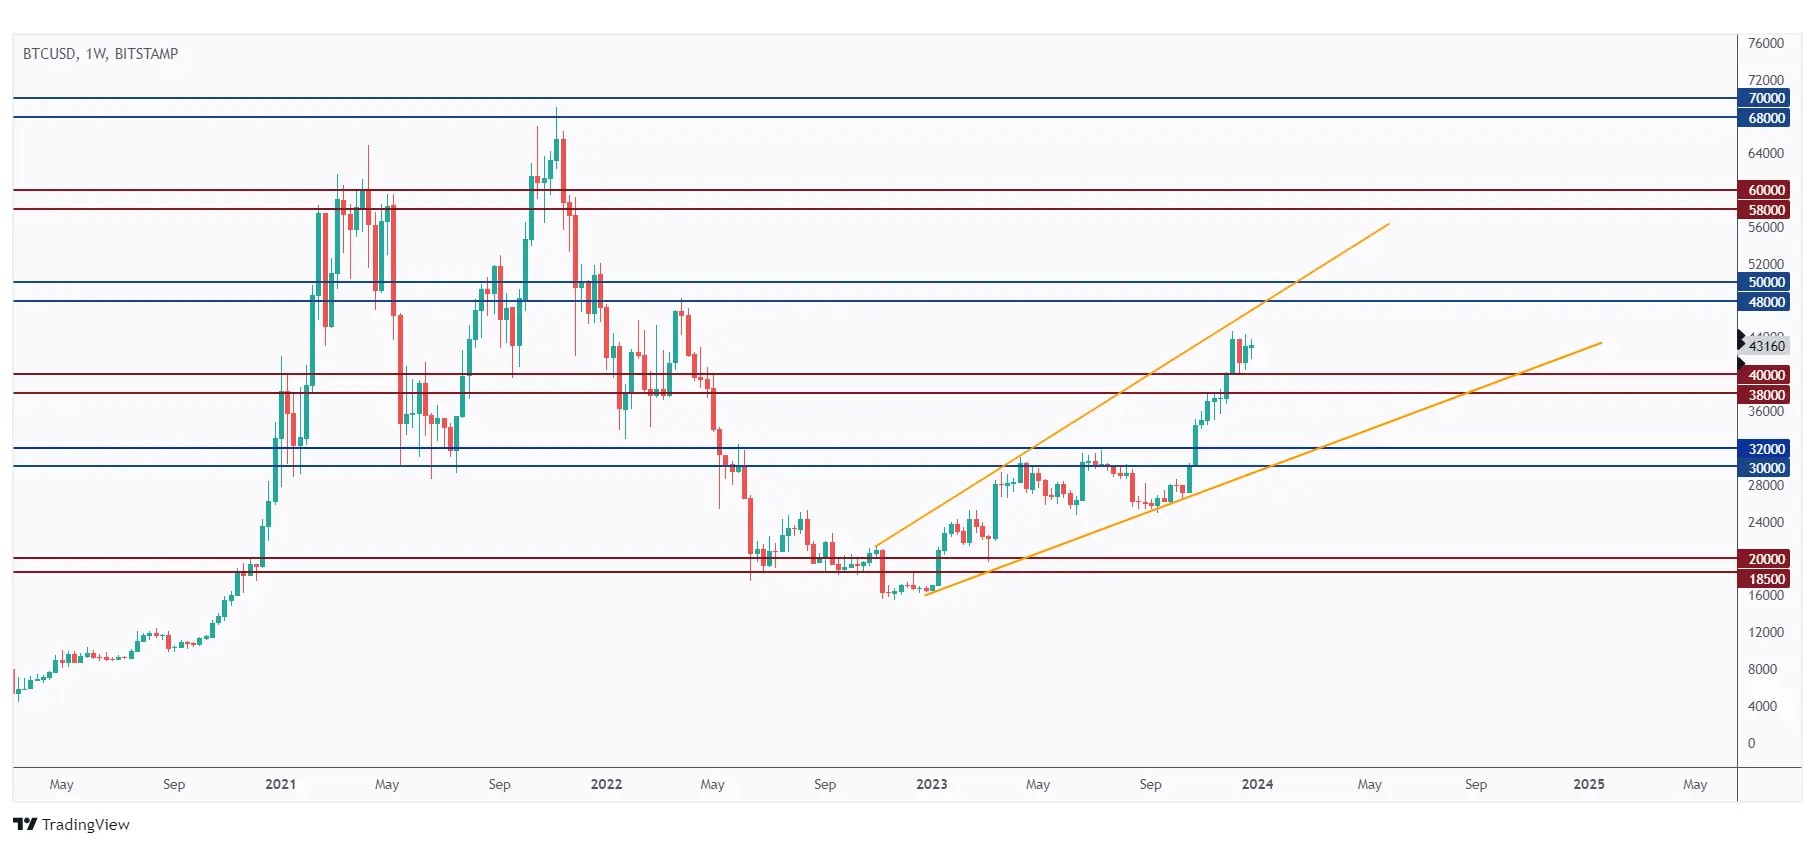 Bitcoin Weekly chart rejecting the 40,000 support and trading higher towards the $48,000 resistance